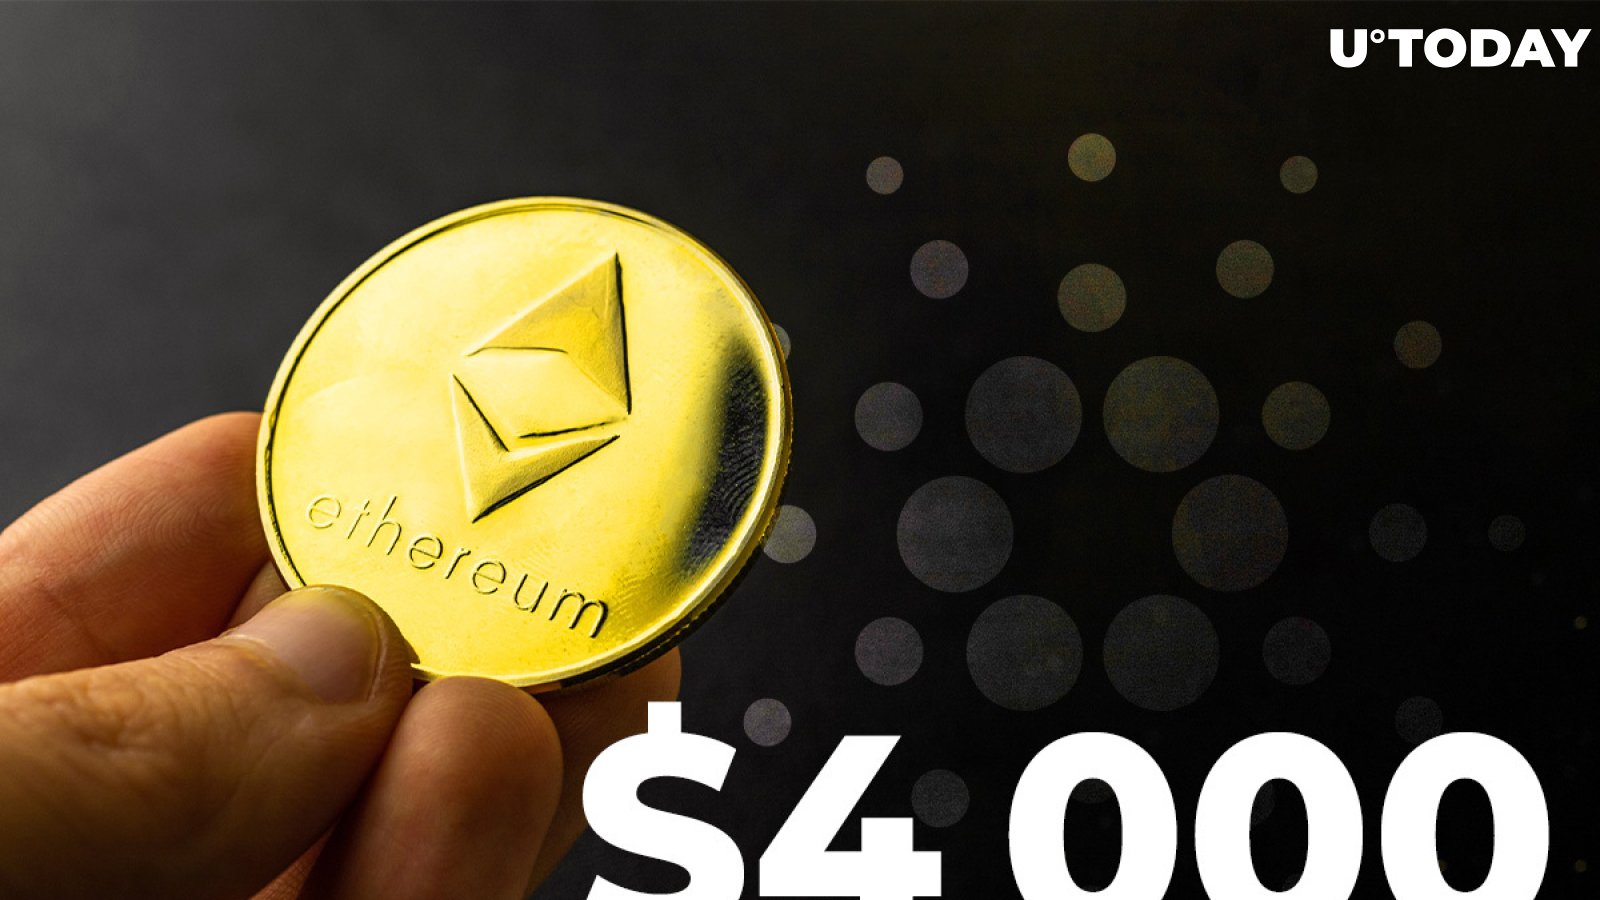 Ethereum Close to Hitting $4,000 While Cardano Aims to Return to Top 5 